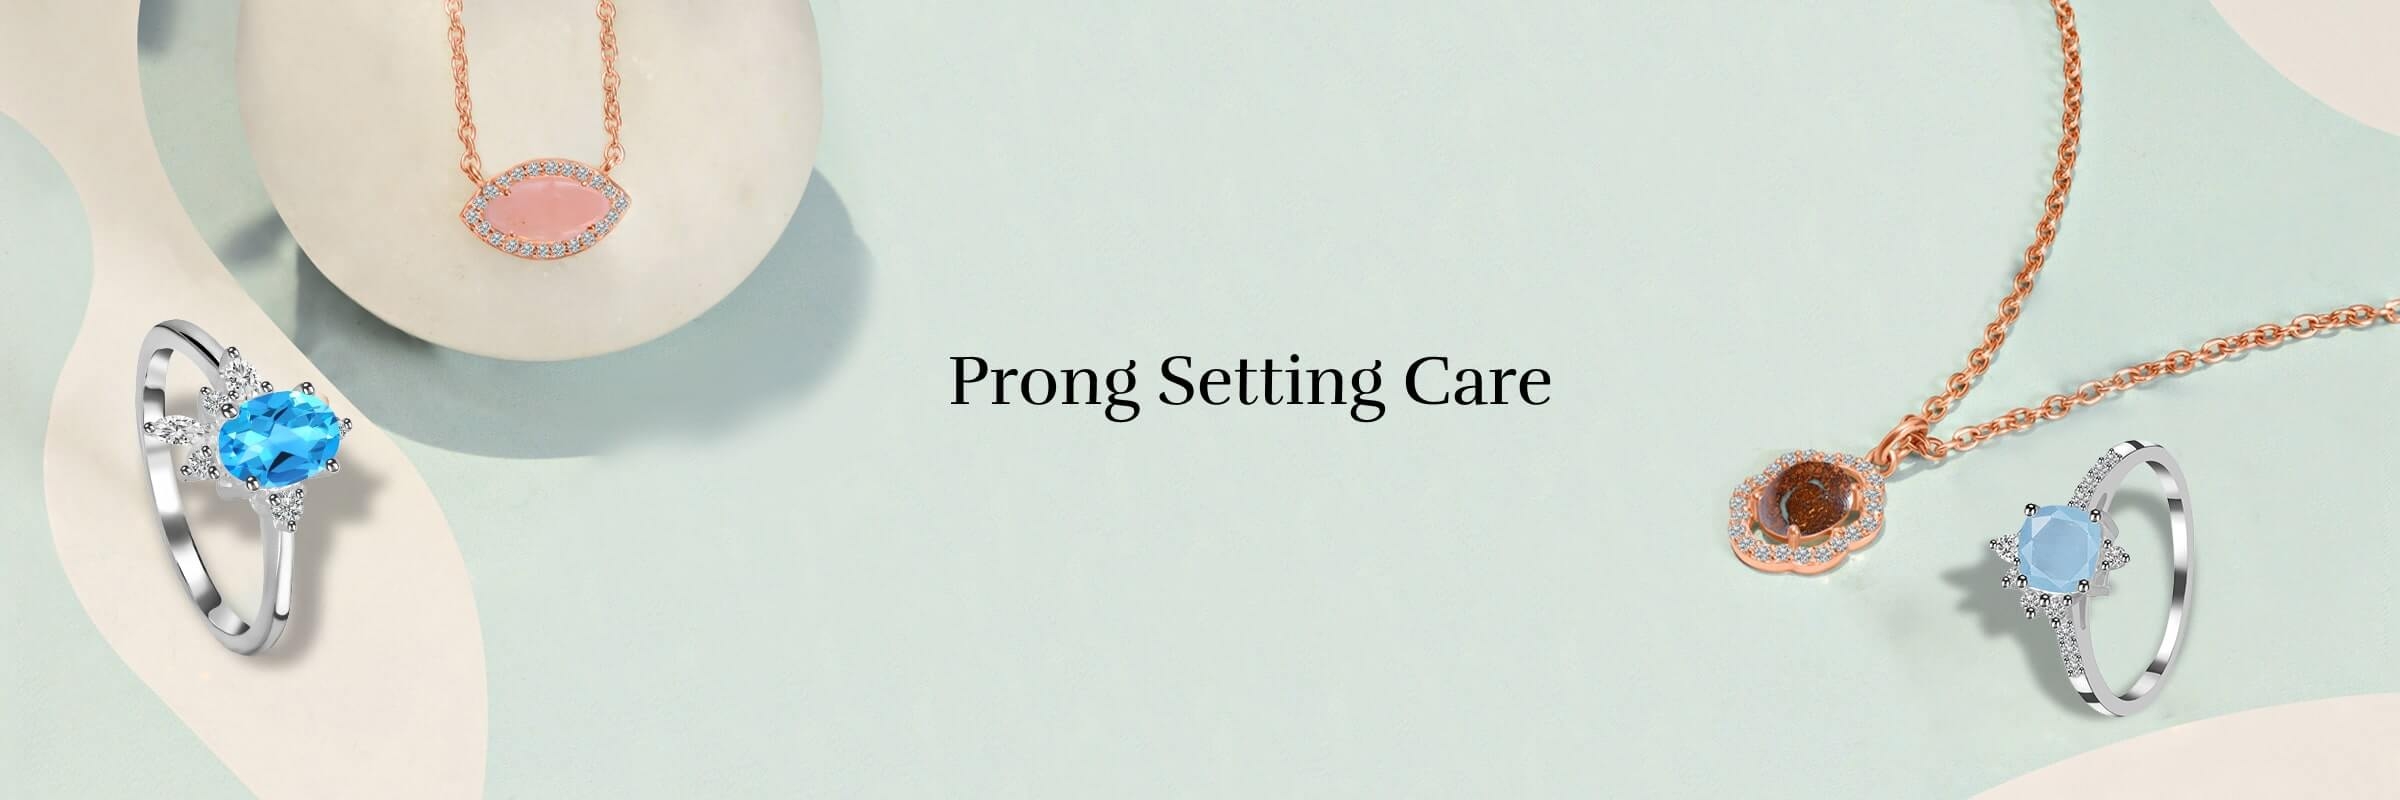 How to Care for Your Prong Setting